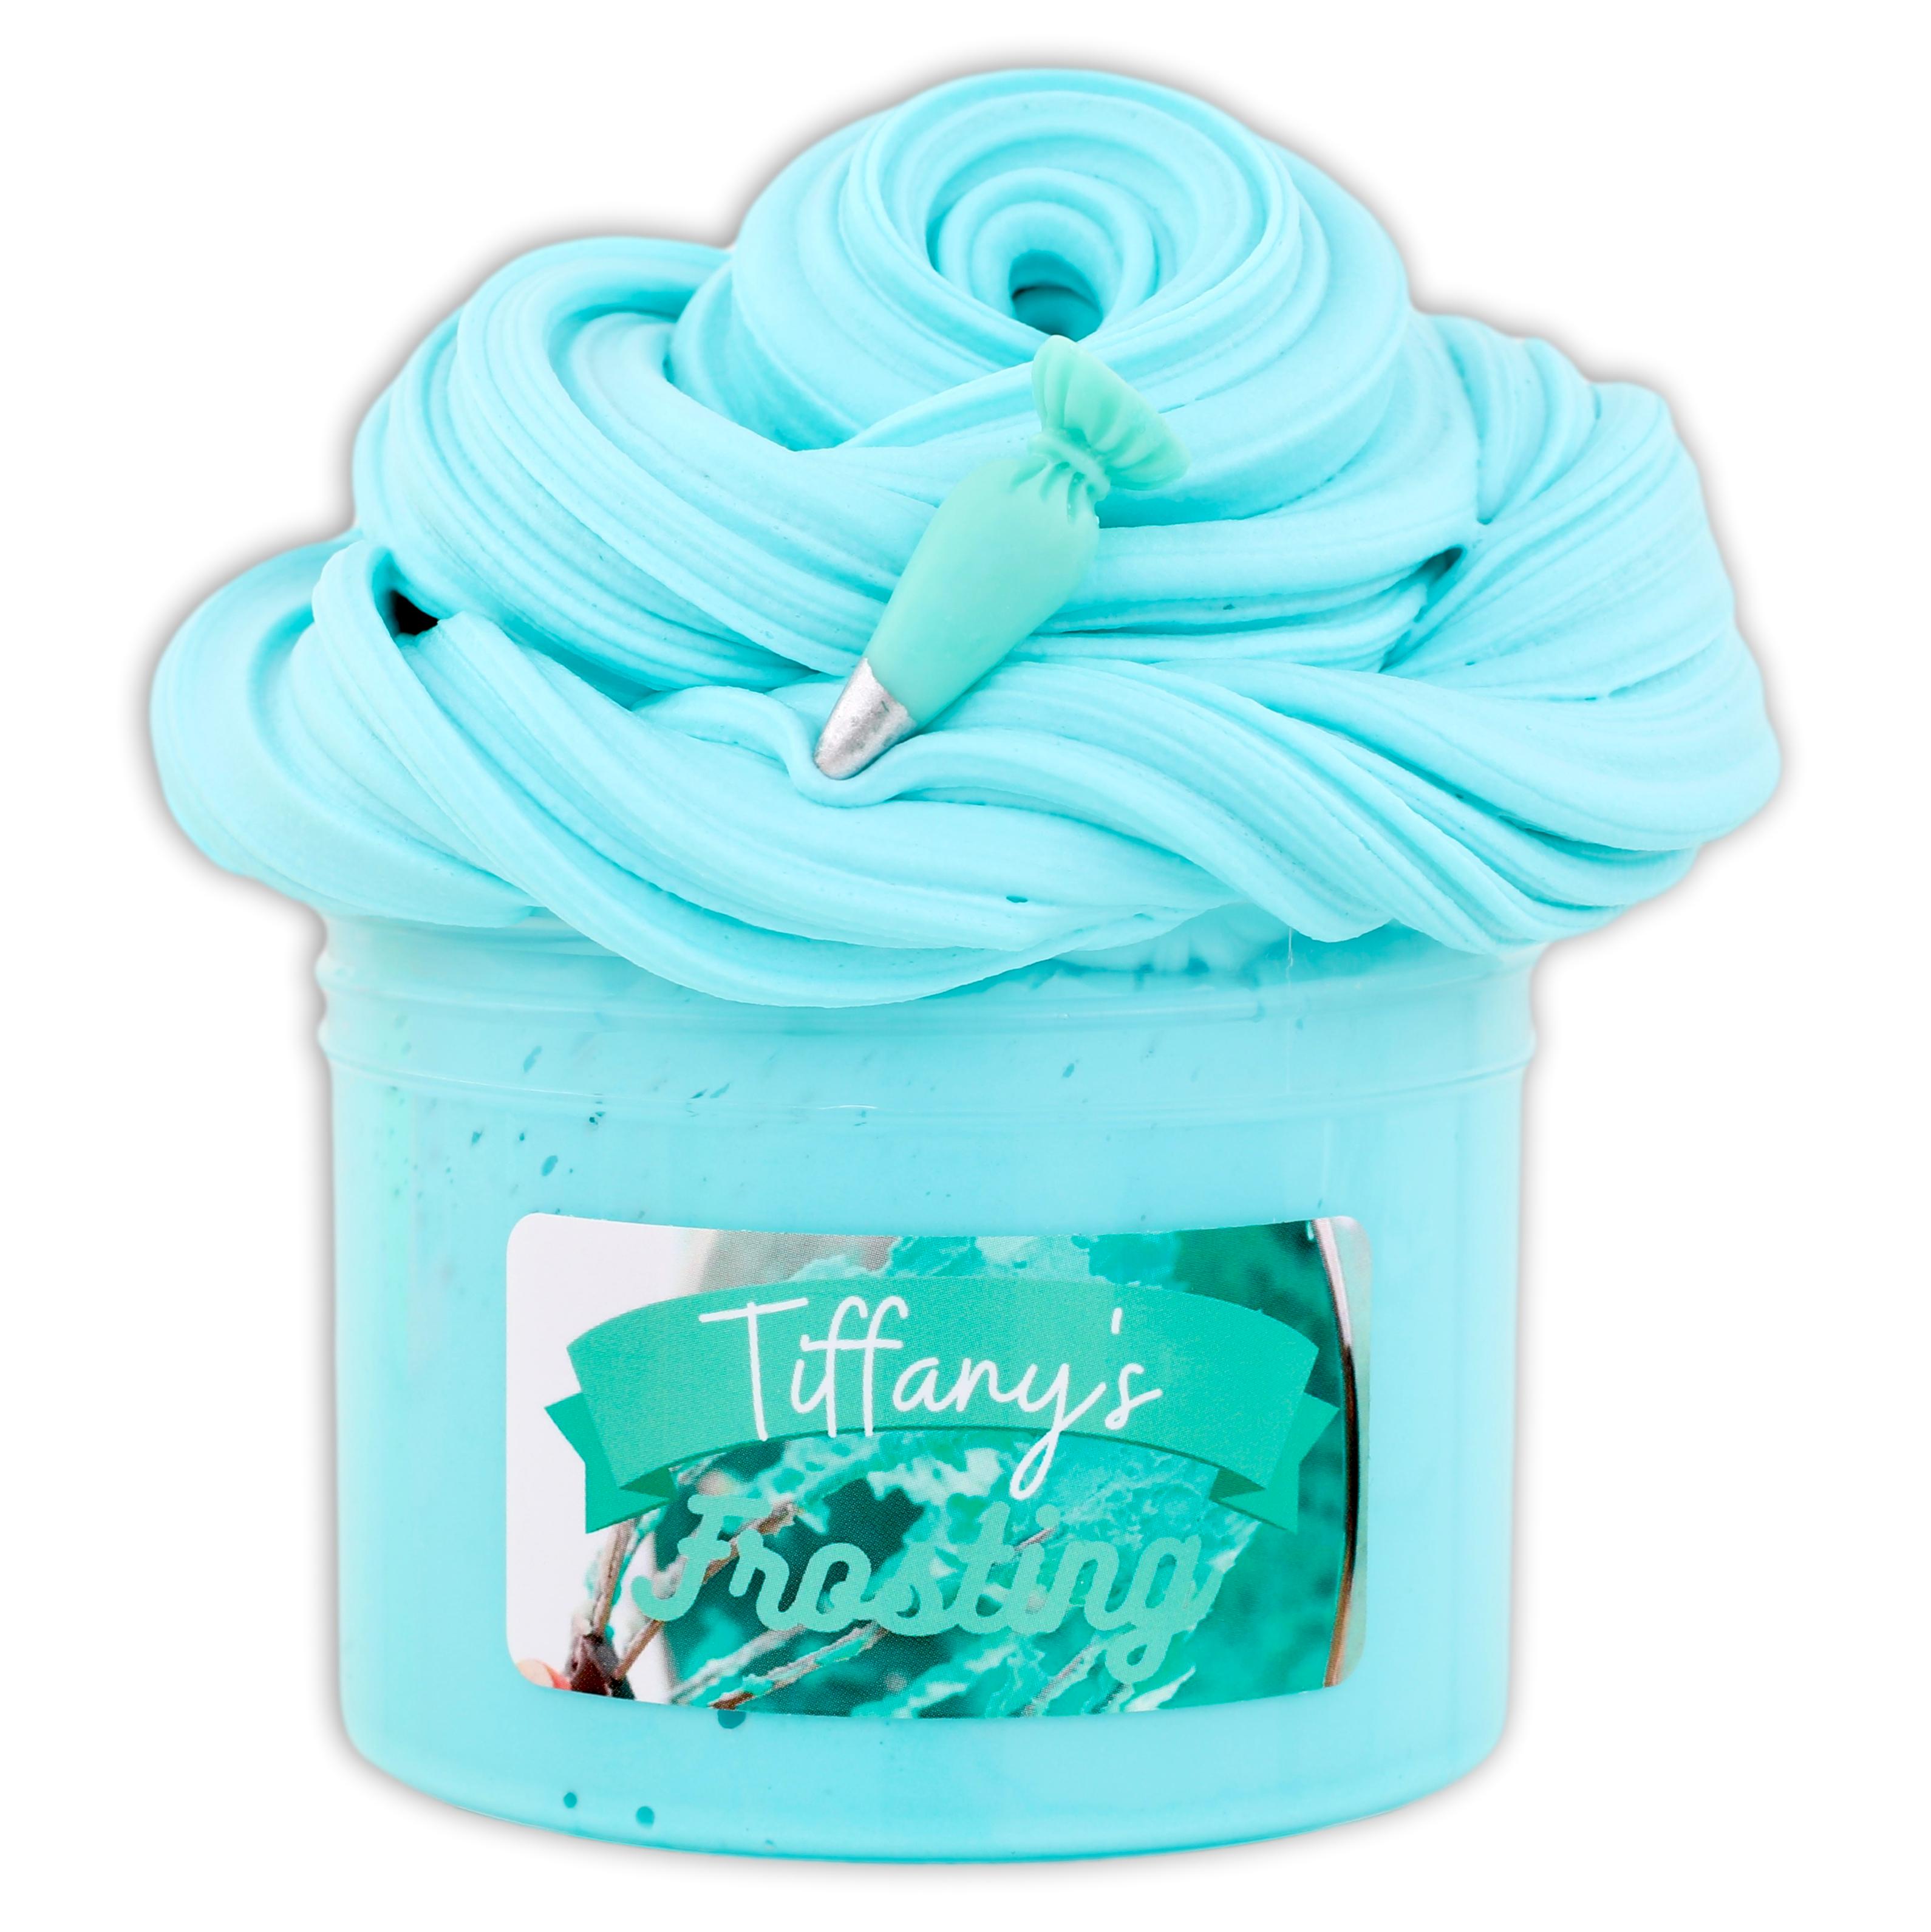 Tiffany's Frosting - Wholesale Case of 18